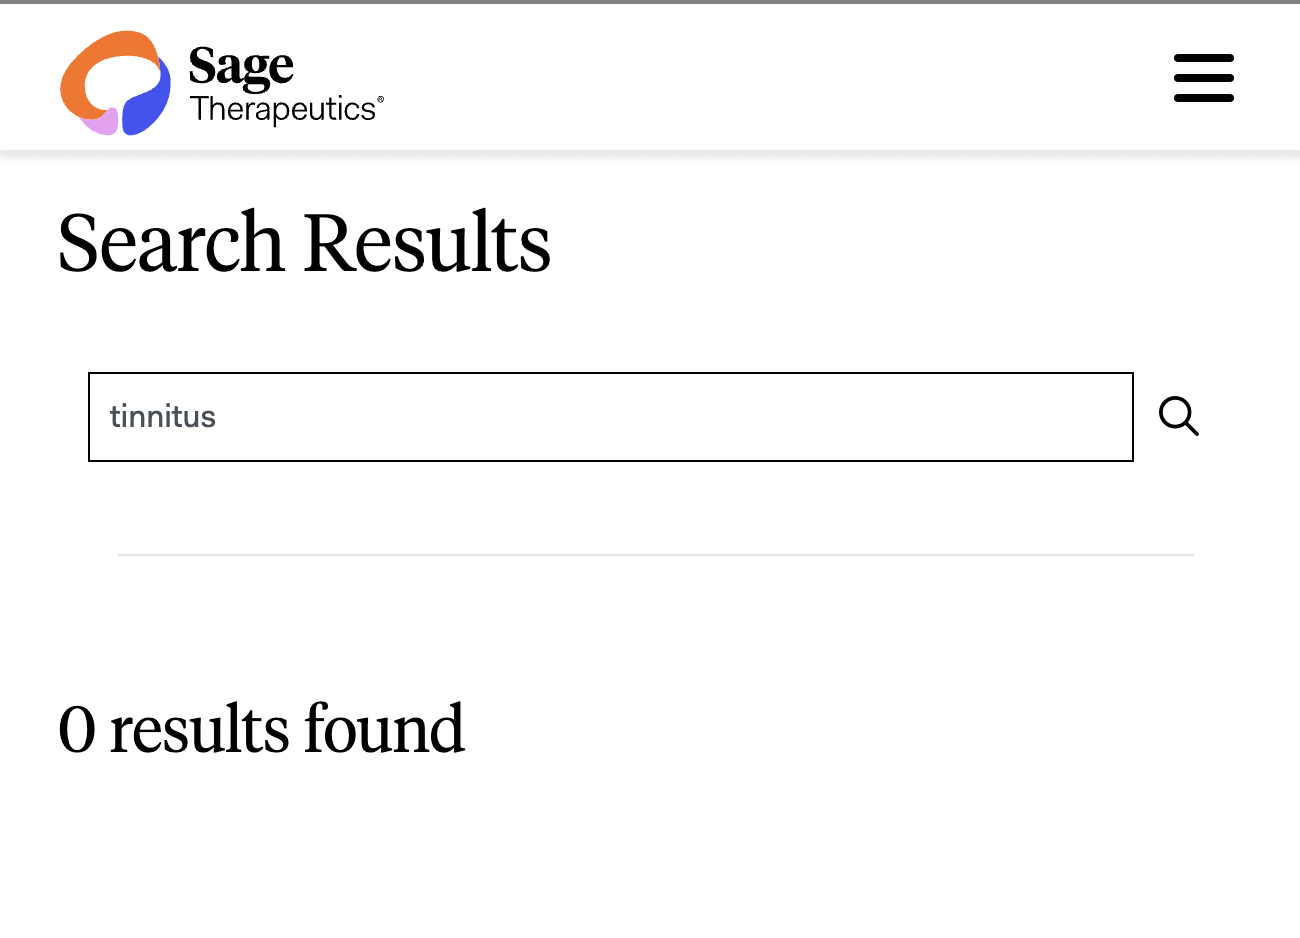 Sage Therapeutics website search for tinnitus returns 0 results